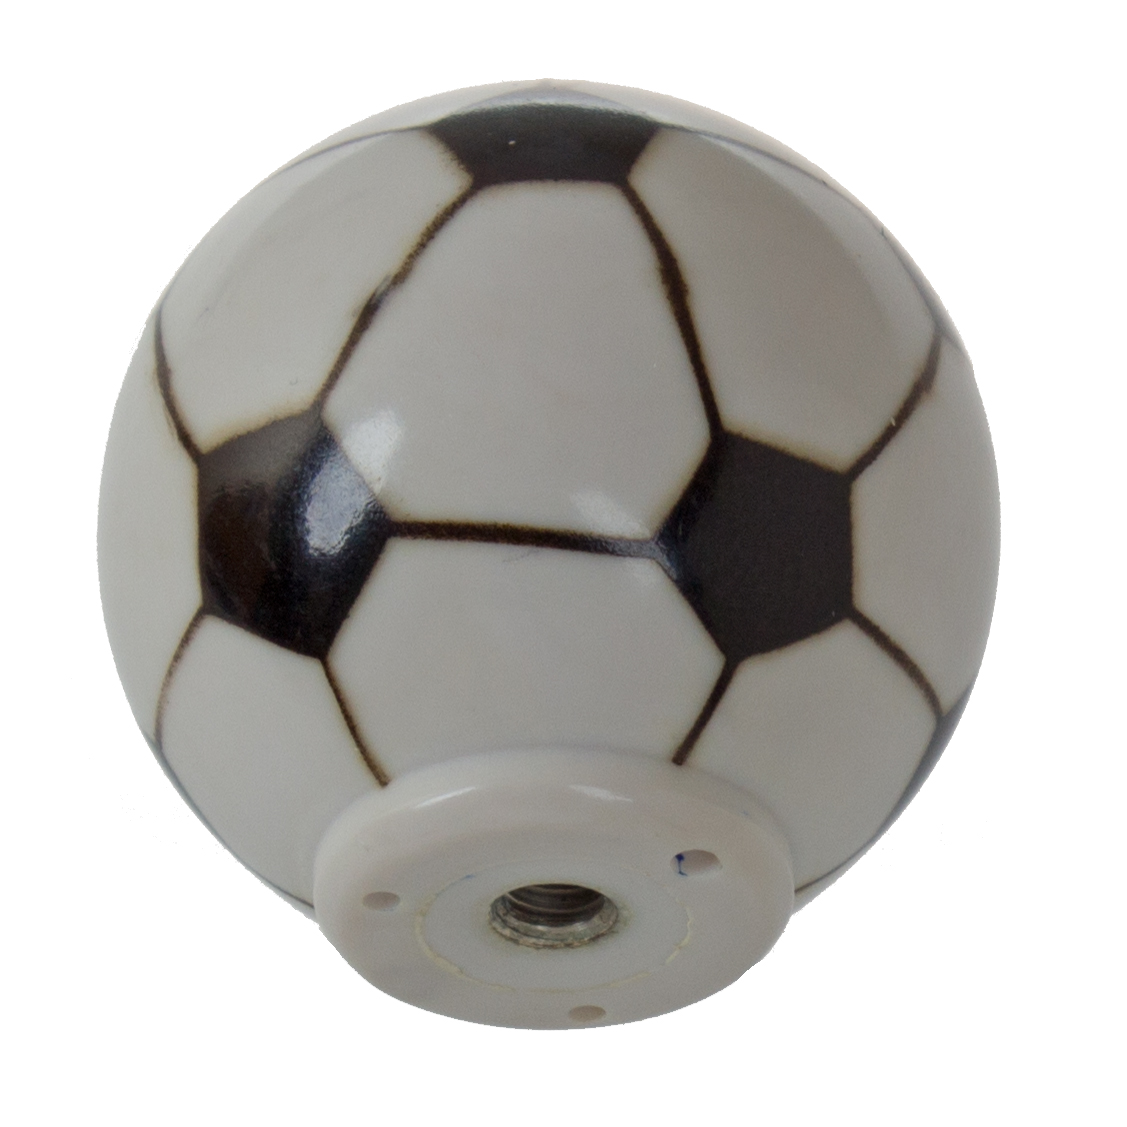 GlideRite 1-1/4 in. Soccer Ball Sports Dresser Drawer Cabinet Knobs, Pack of 5 - image 2 of 4